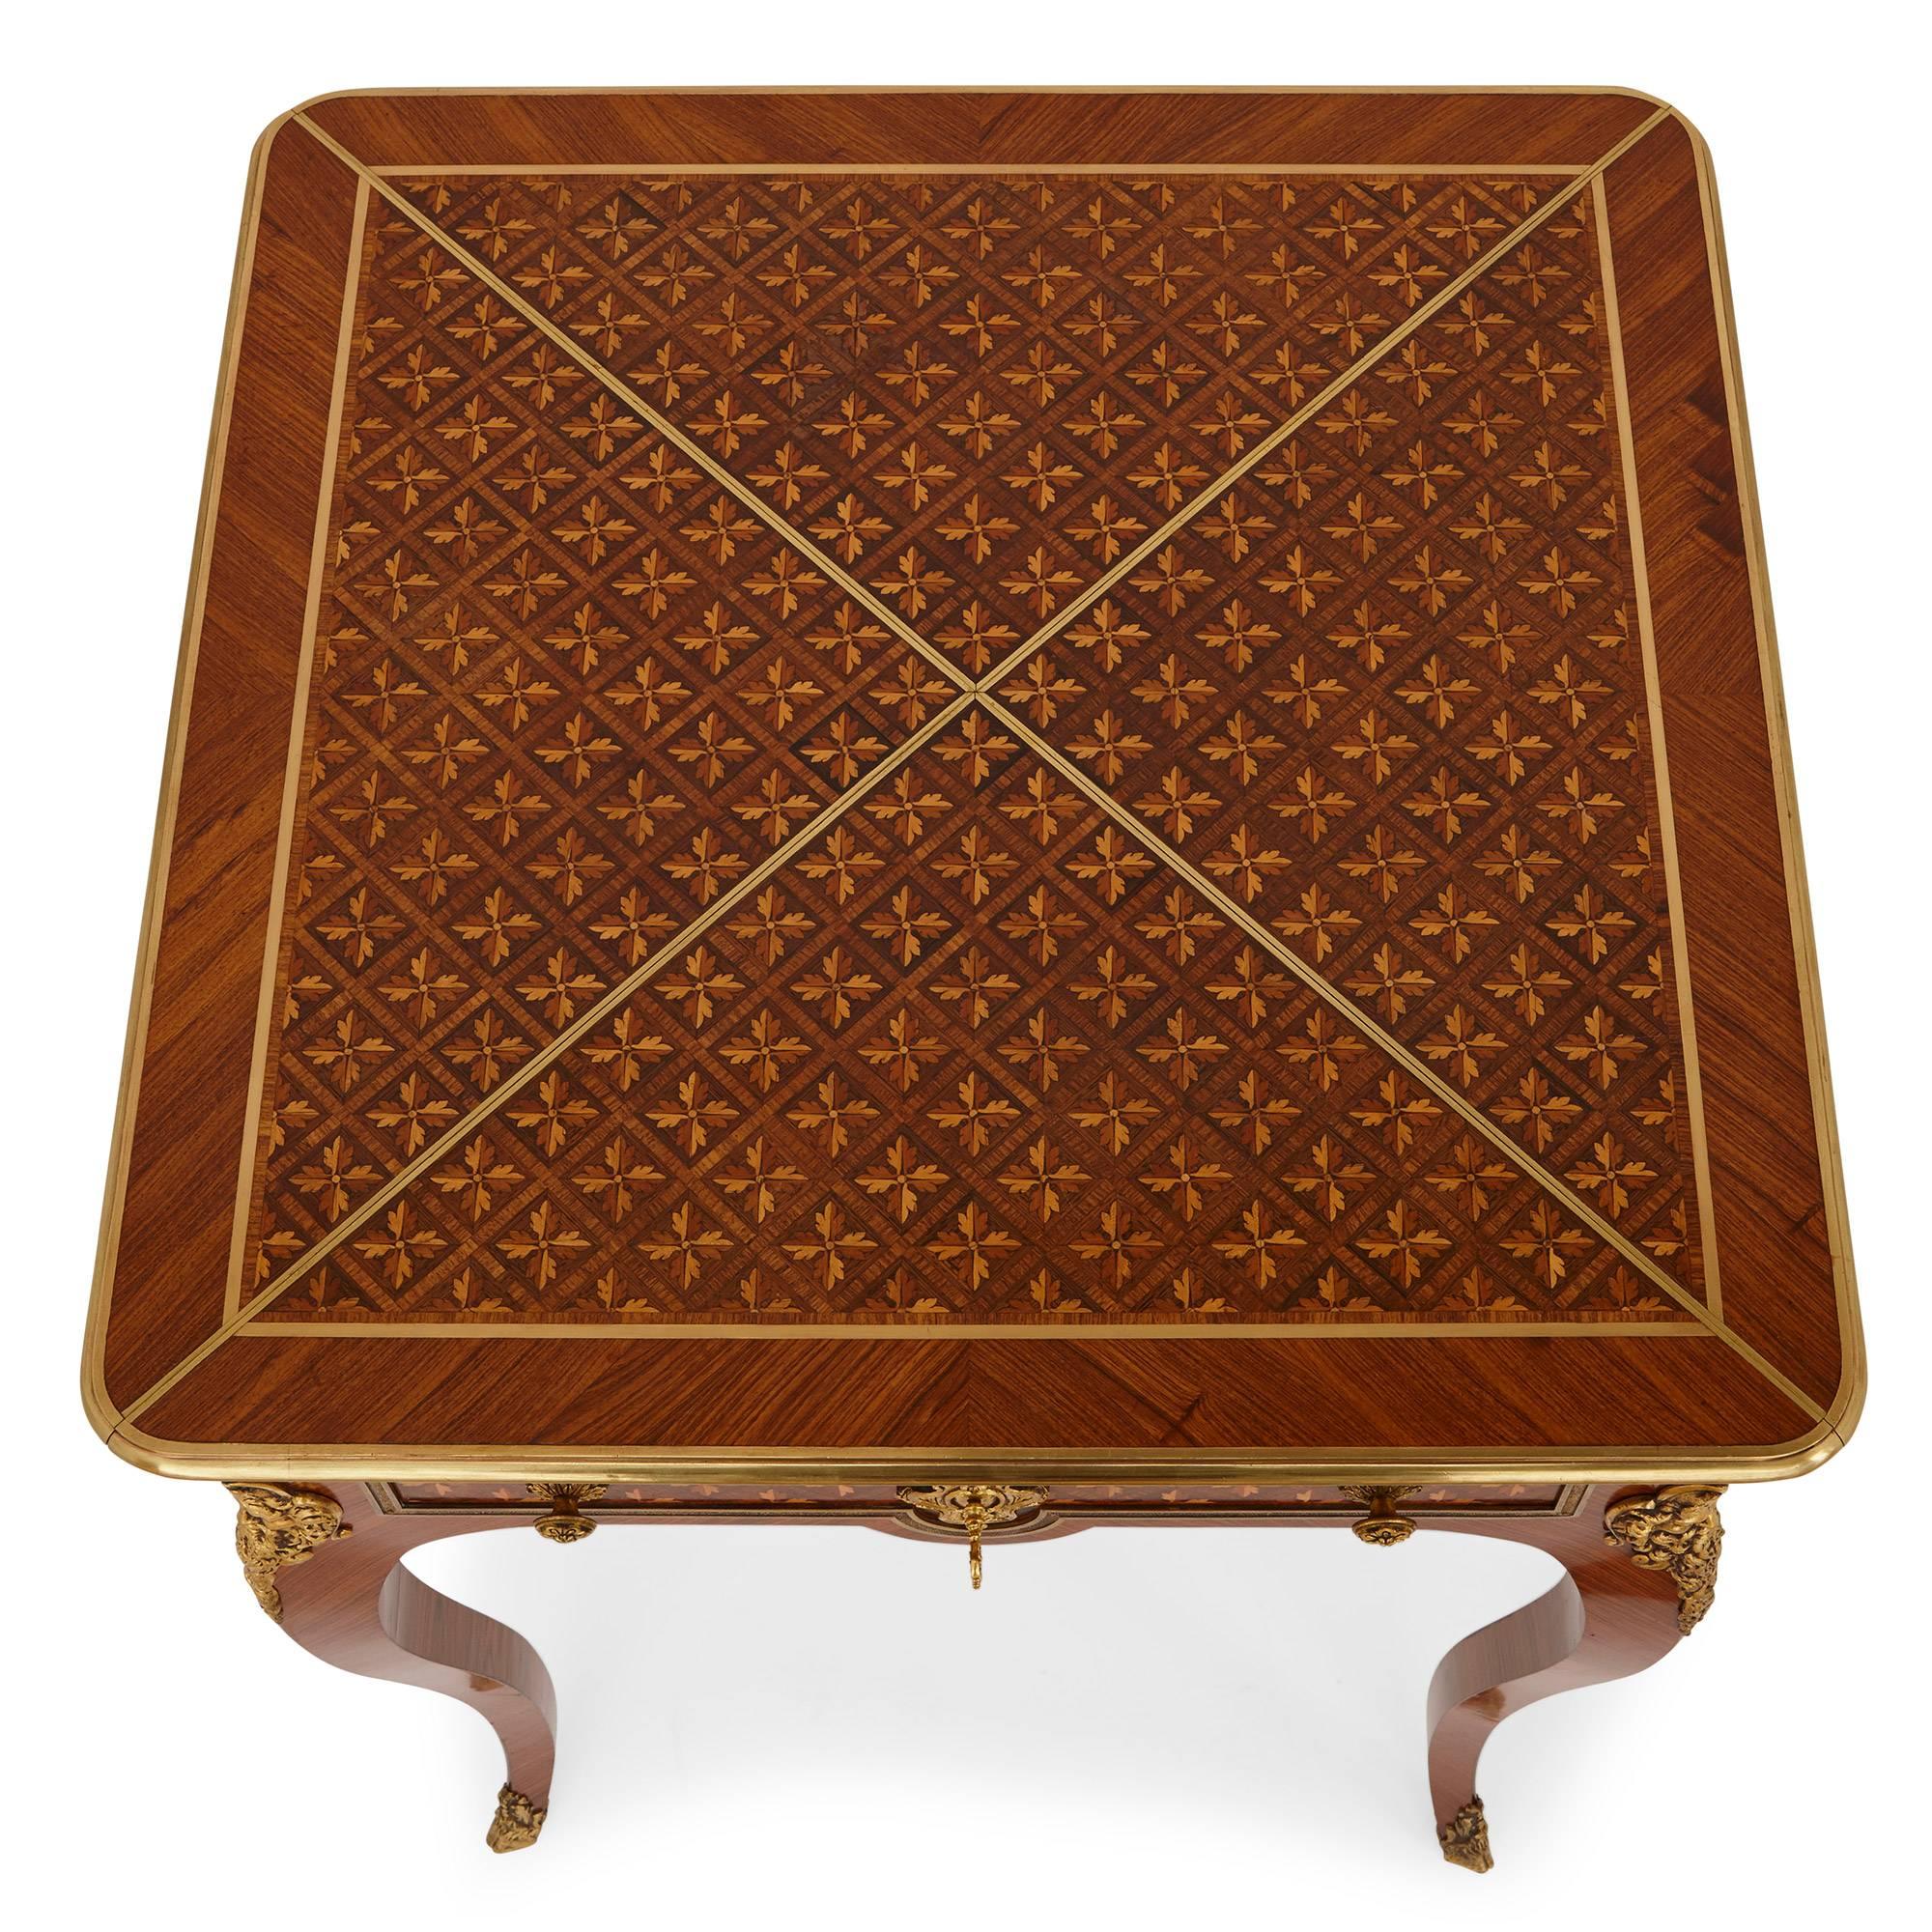 Gilt French Antique Ormolu-Mounted Rococo Parquetry Folding Card Table